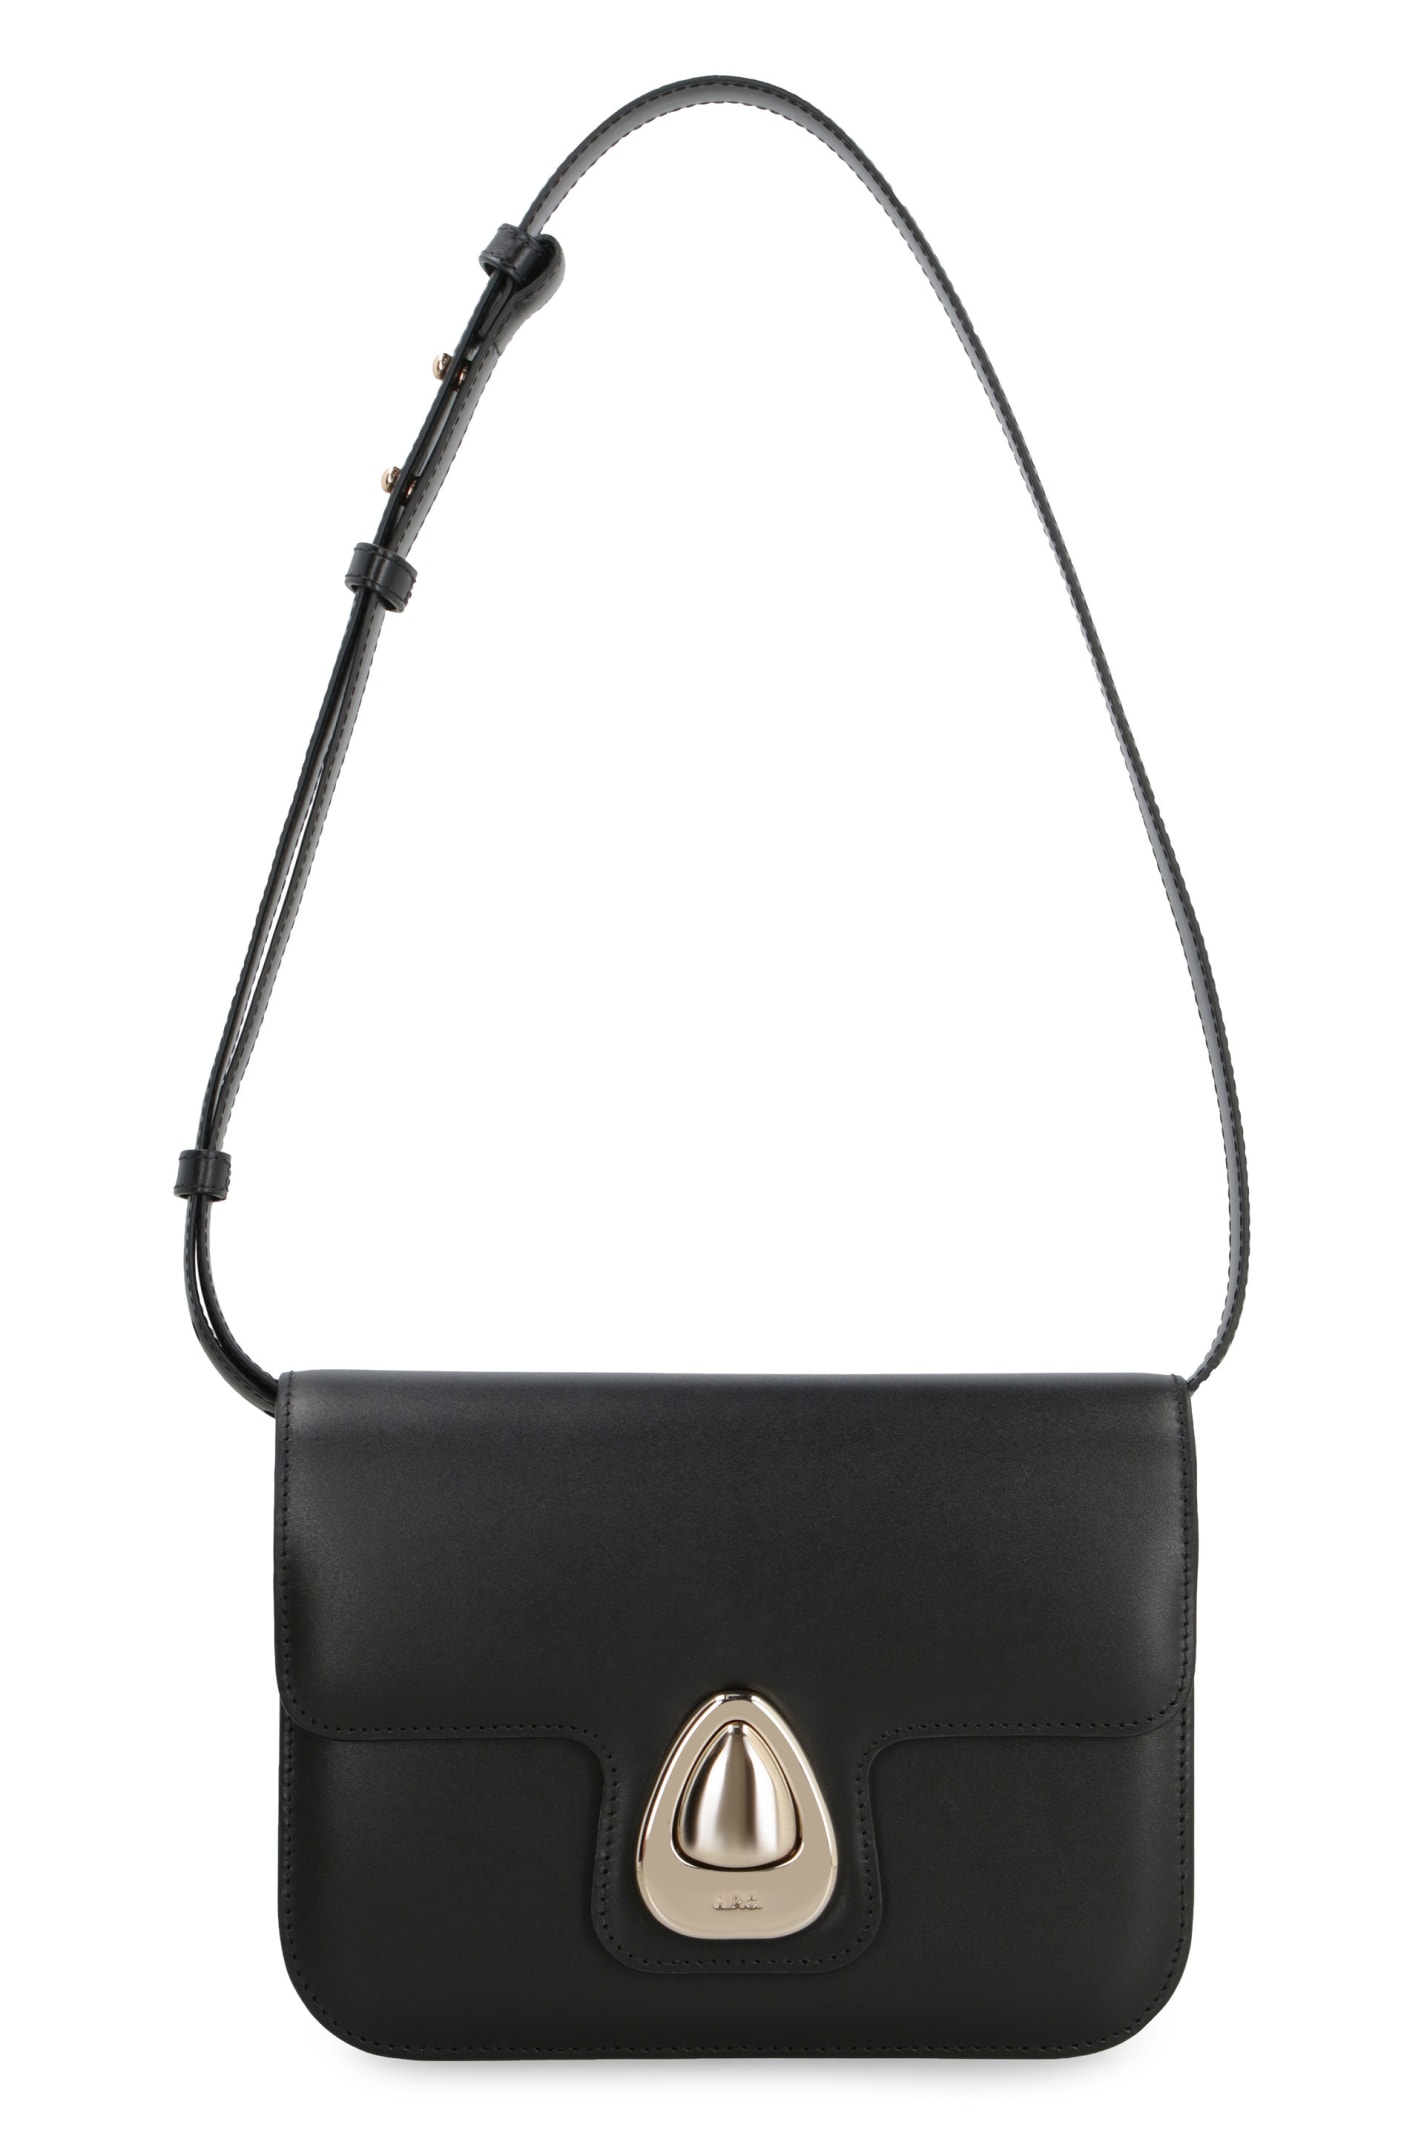 Shop Apc Astra Leather Small Bag In Black